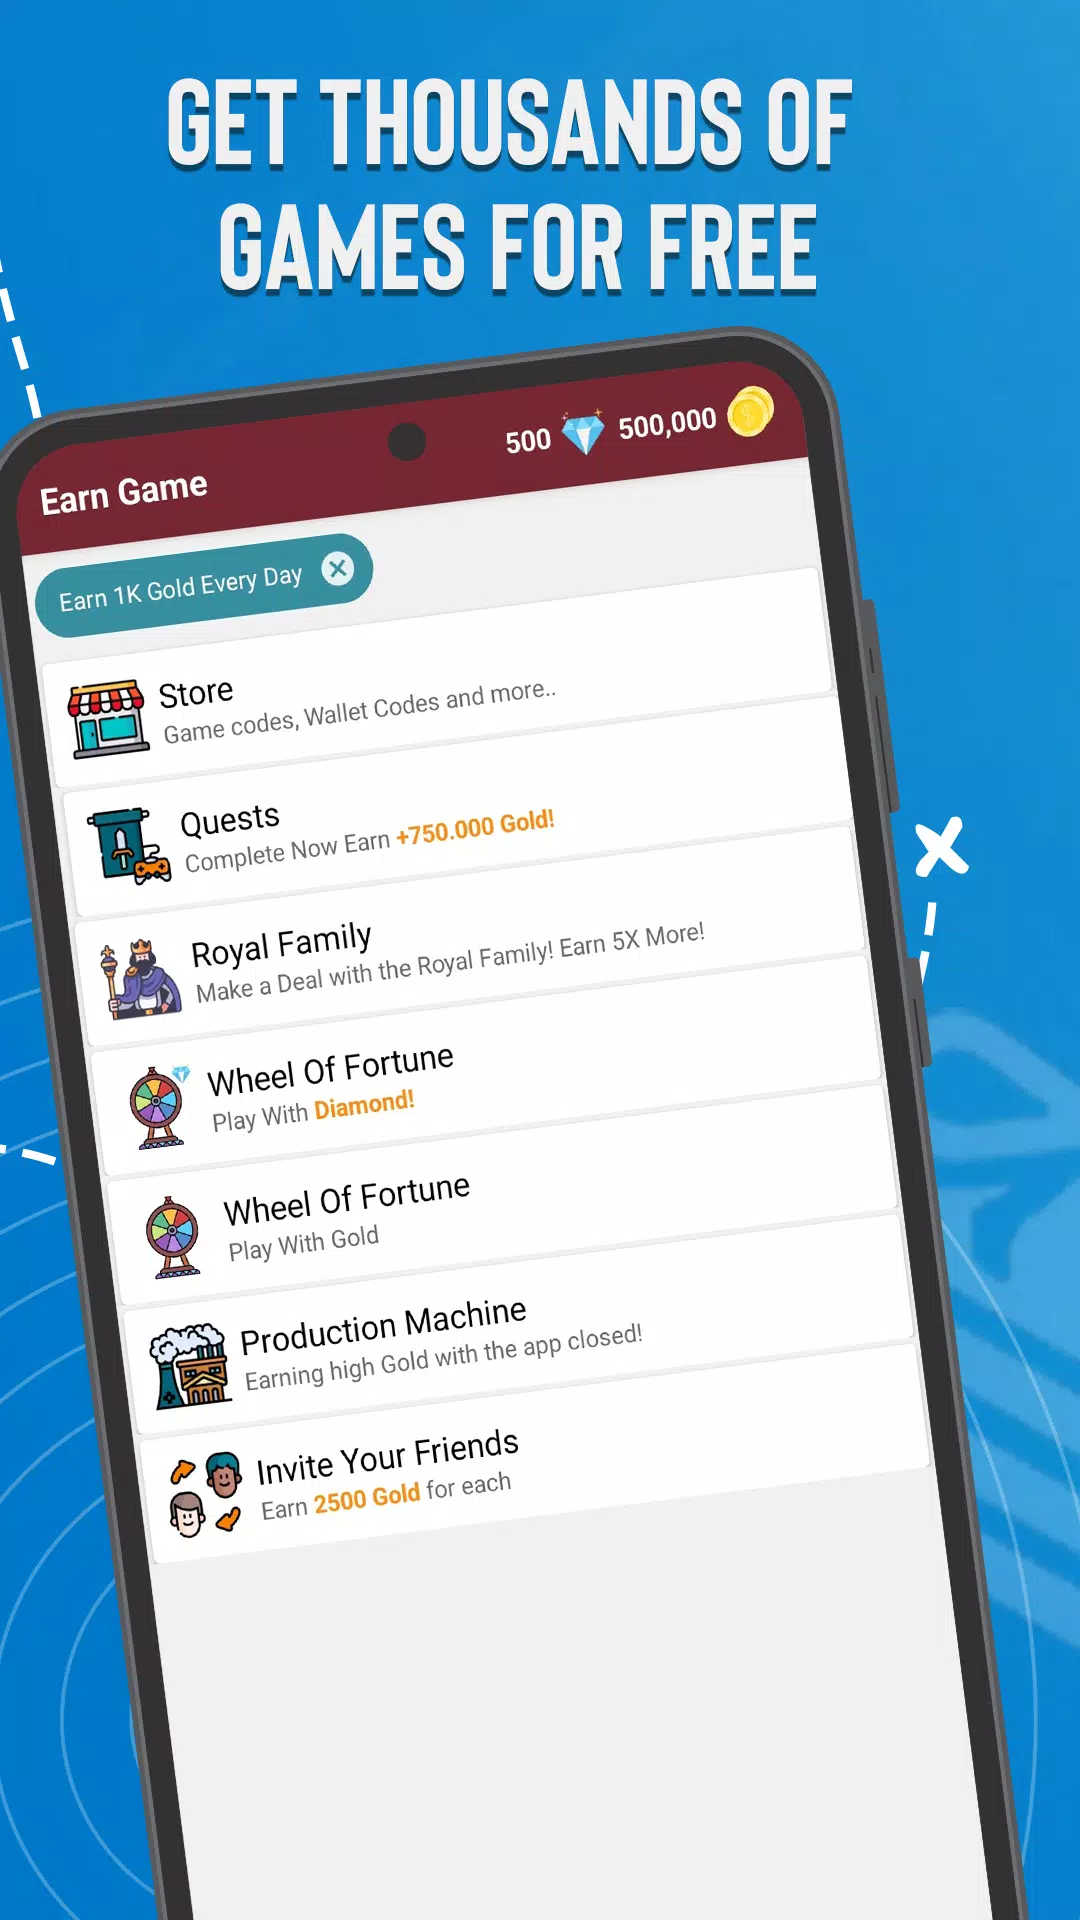 GiftCode - Earn Game Codes - APK Download for Android